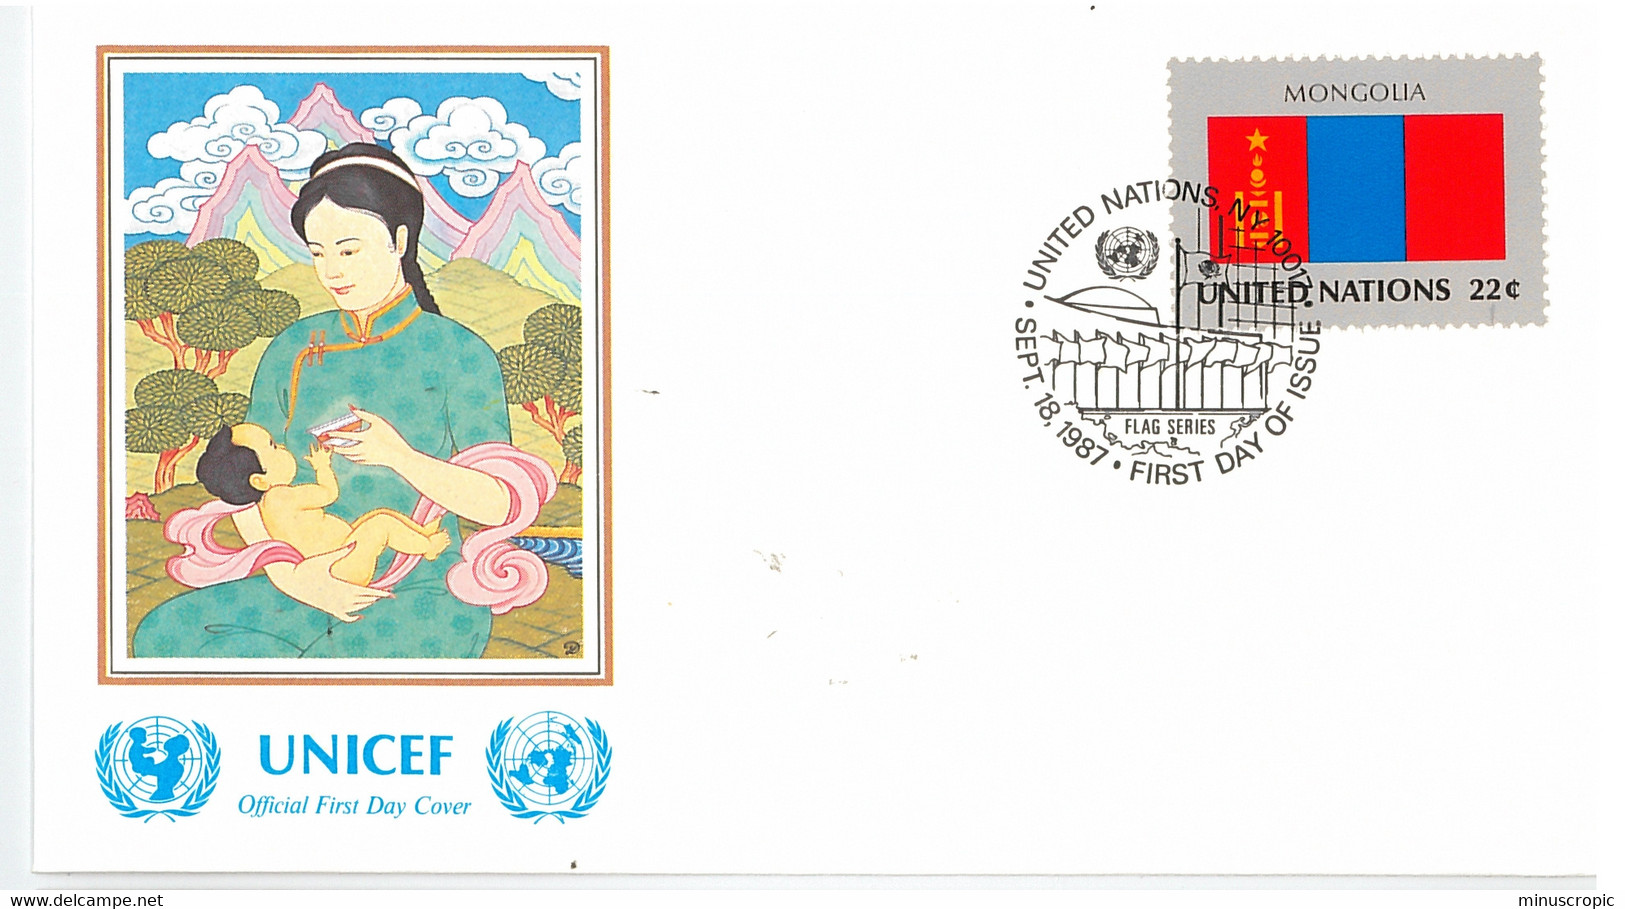 Enveloppe FDC United Nations - UNICEF - Flag Series 12/87 - Mongolia - 1987 - Covers & Documents